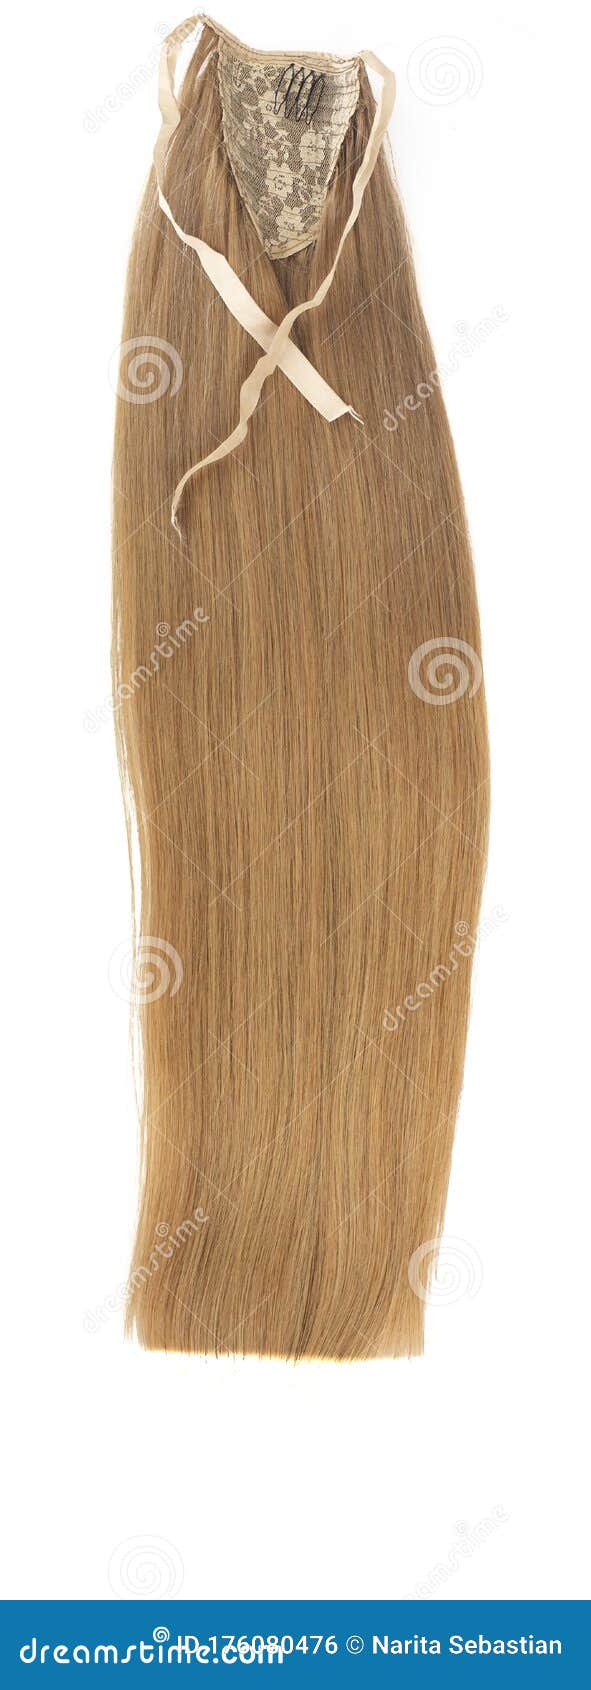 Hair Extensions or Fake Human Hair for Beauty Center or Saloon - Light  Brown Color. Stock Photo - Image of accesoriestools, head: 176080476